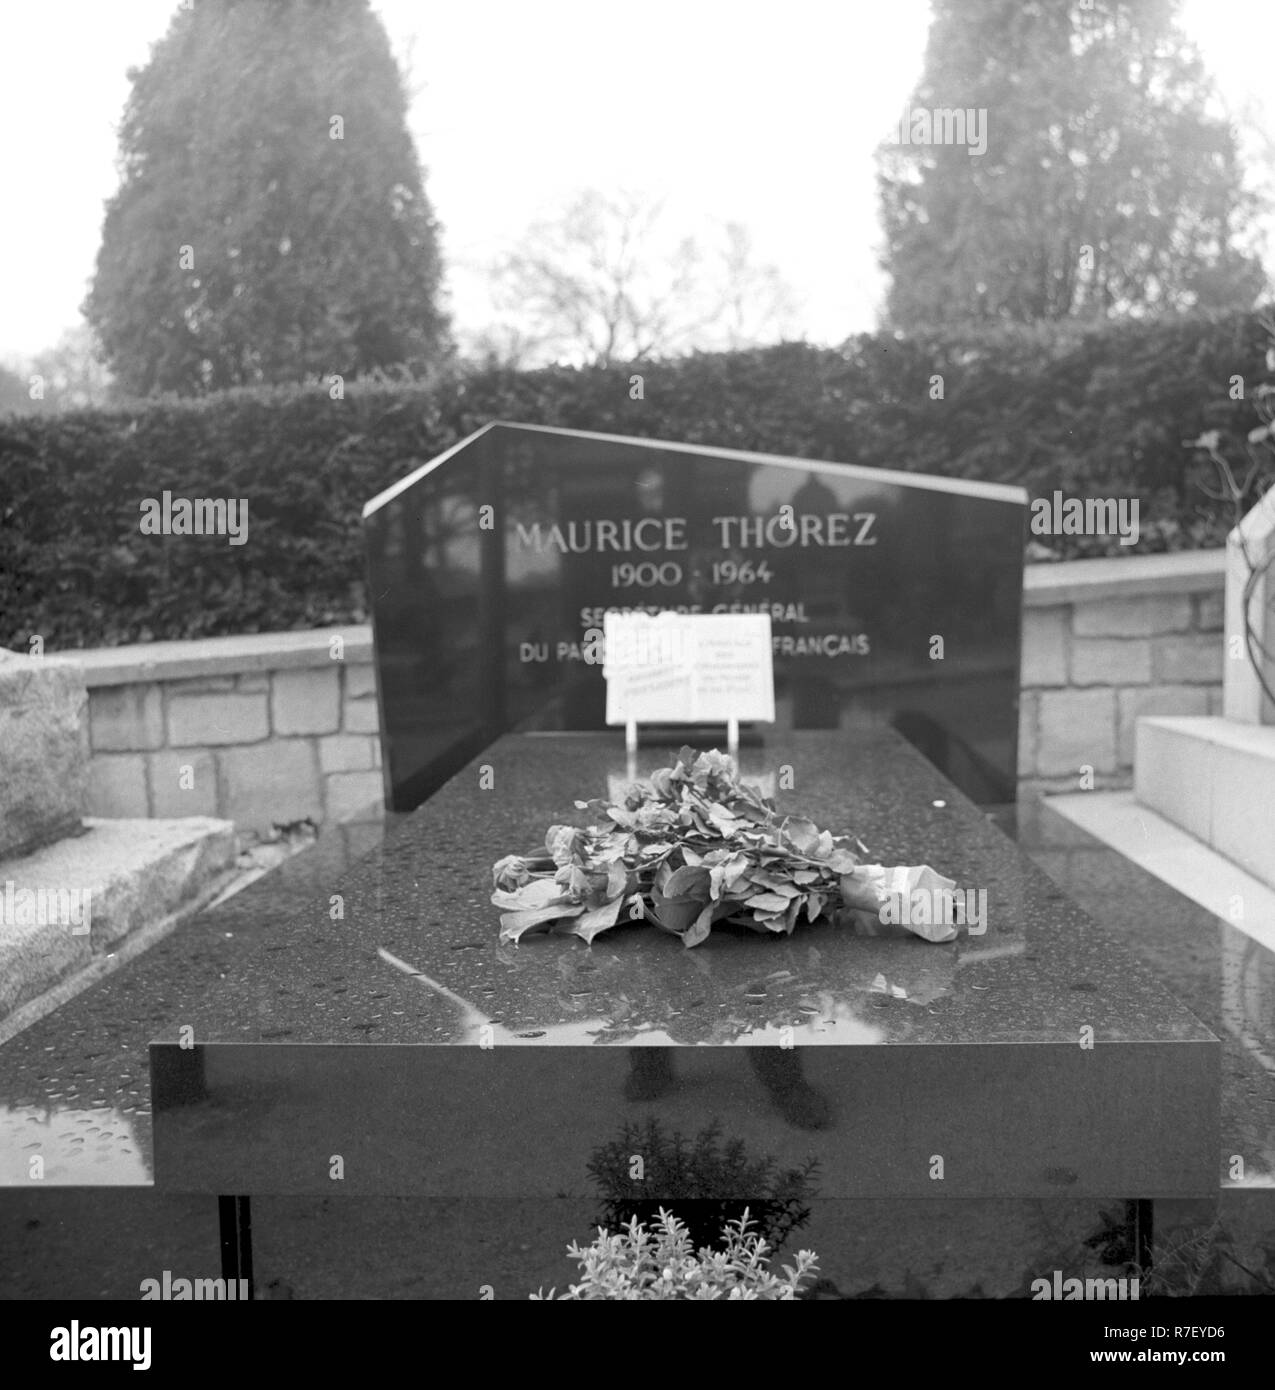 View of the grave of the former secretary general of the French Communist Party, Maurice Thorez, on the biggest cemetery of Paris, Pere Lachaise, in Paris, France, 13 November 1970. Thorez was secretary general of the party from 1930 until 1964. On the Pere Lachaise cemetery, many famous historical figures are buried. Photo: Wilfried Glienke | usage worldwide Stock Photo